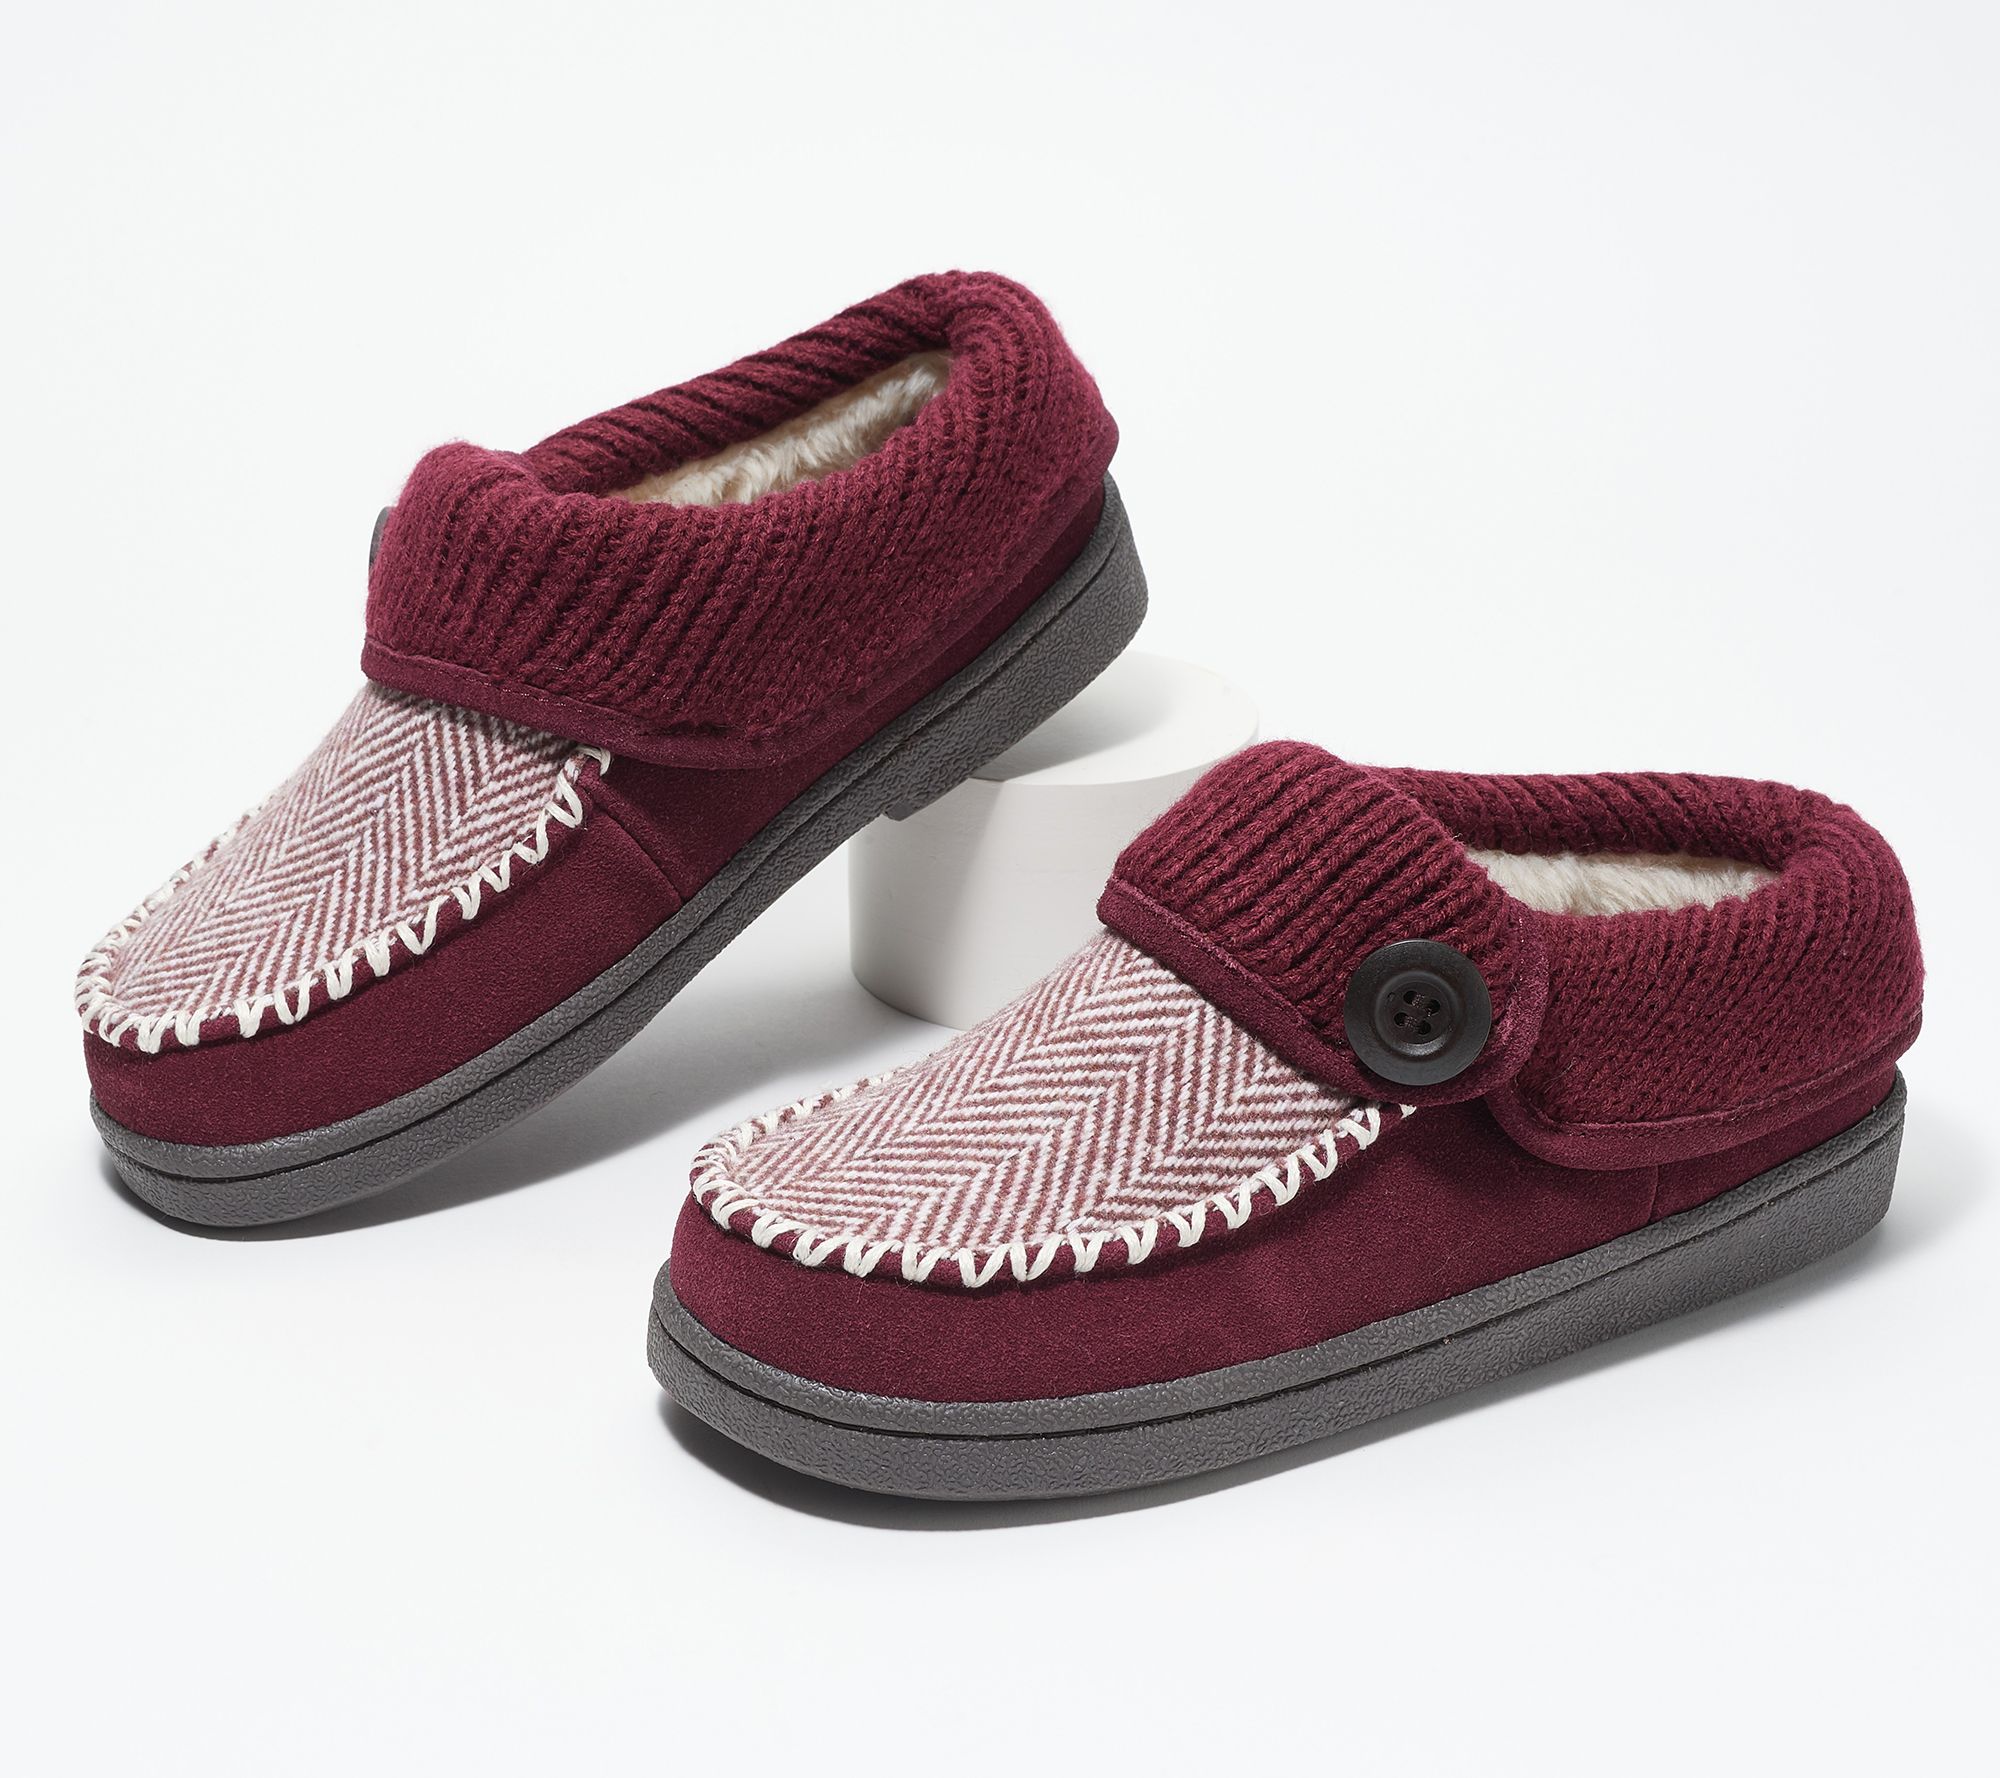 Clarks Suede Women's Herringbone Slippers with Ribbed Trim - QVC.com